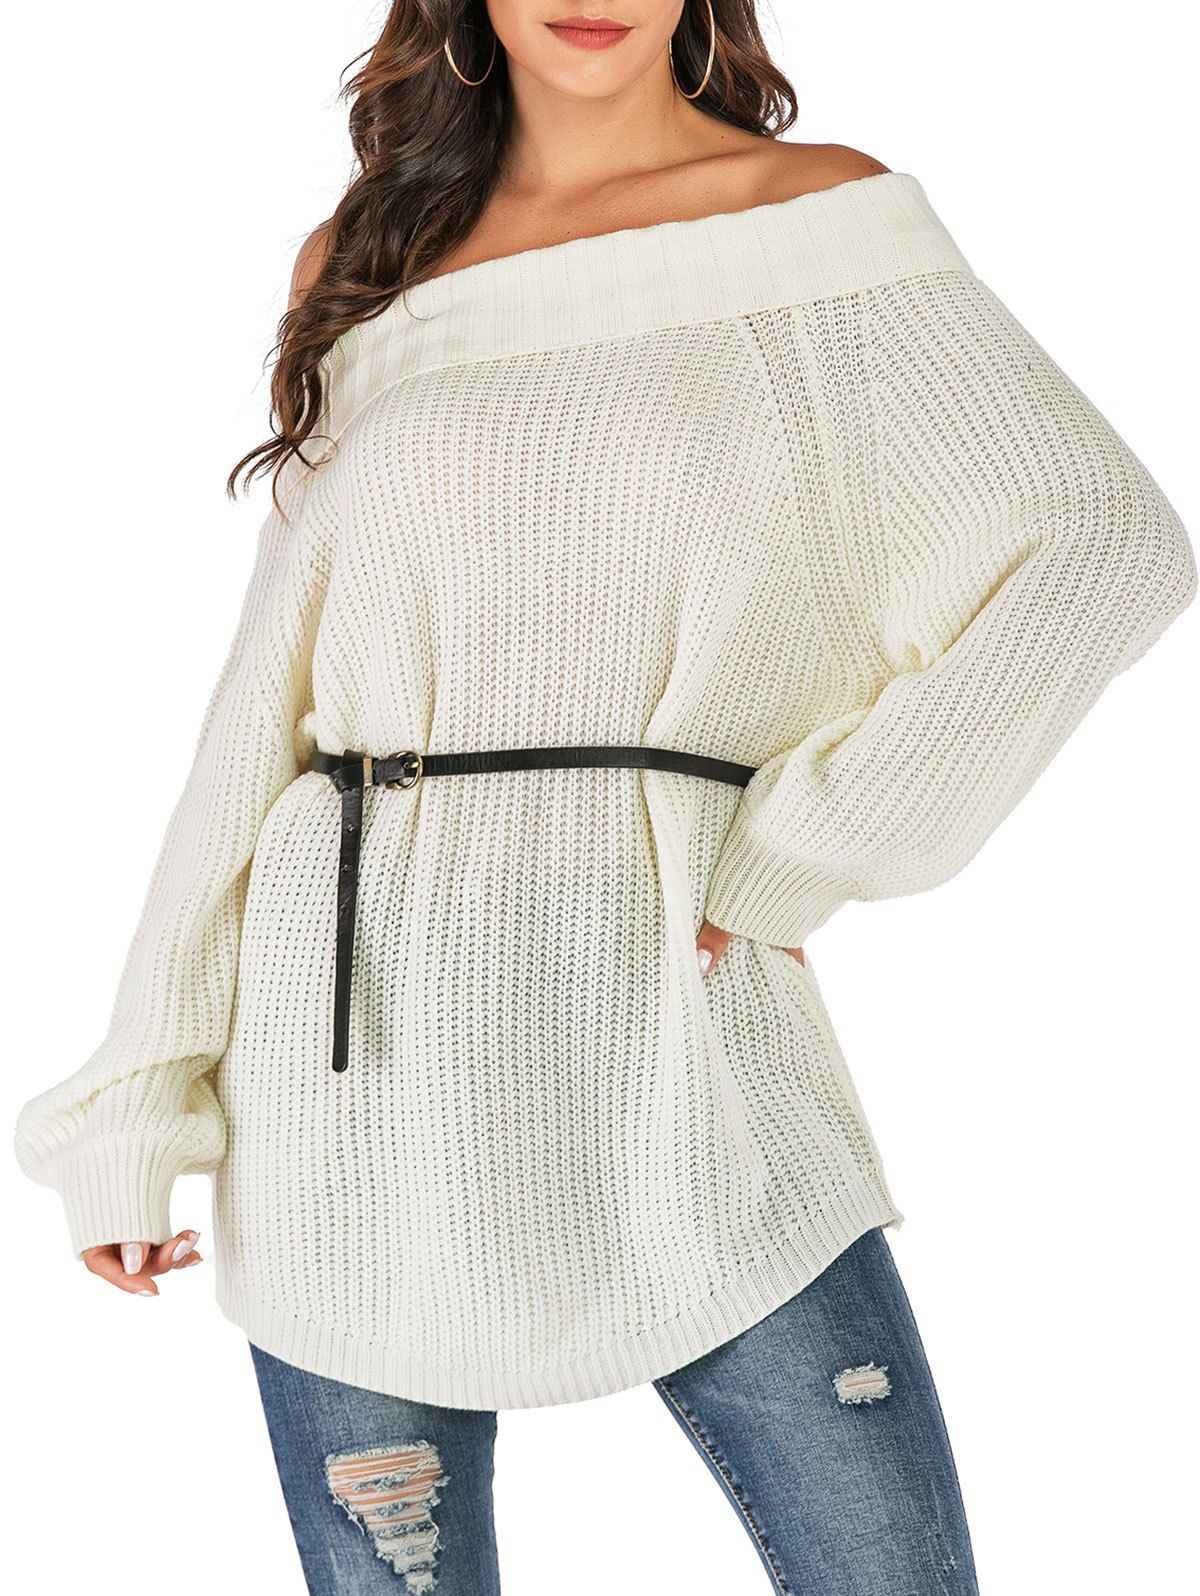 Folded Off The Shoulder Tunic Sweater - WHITE S